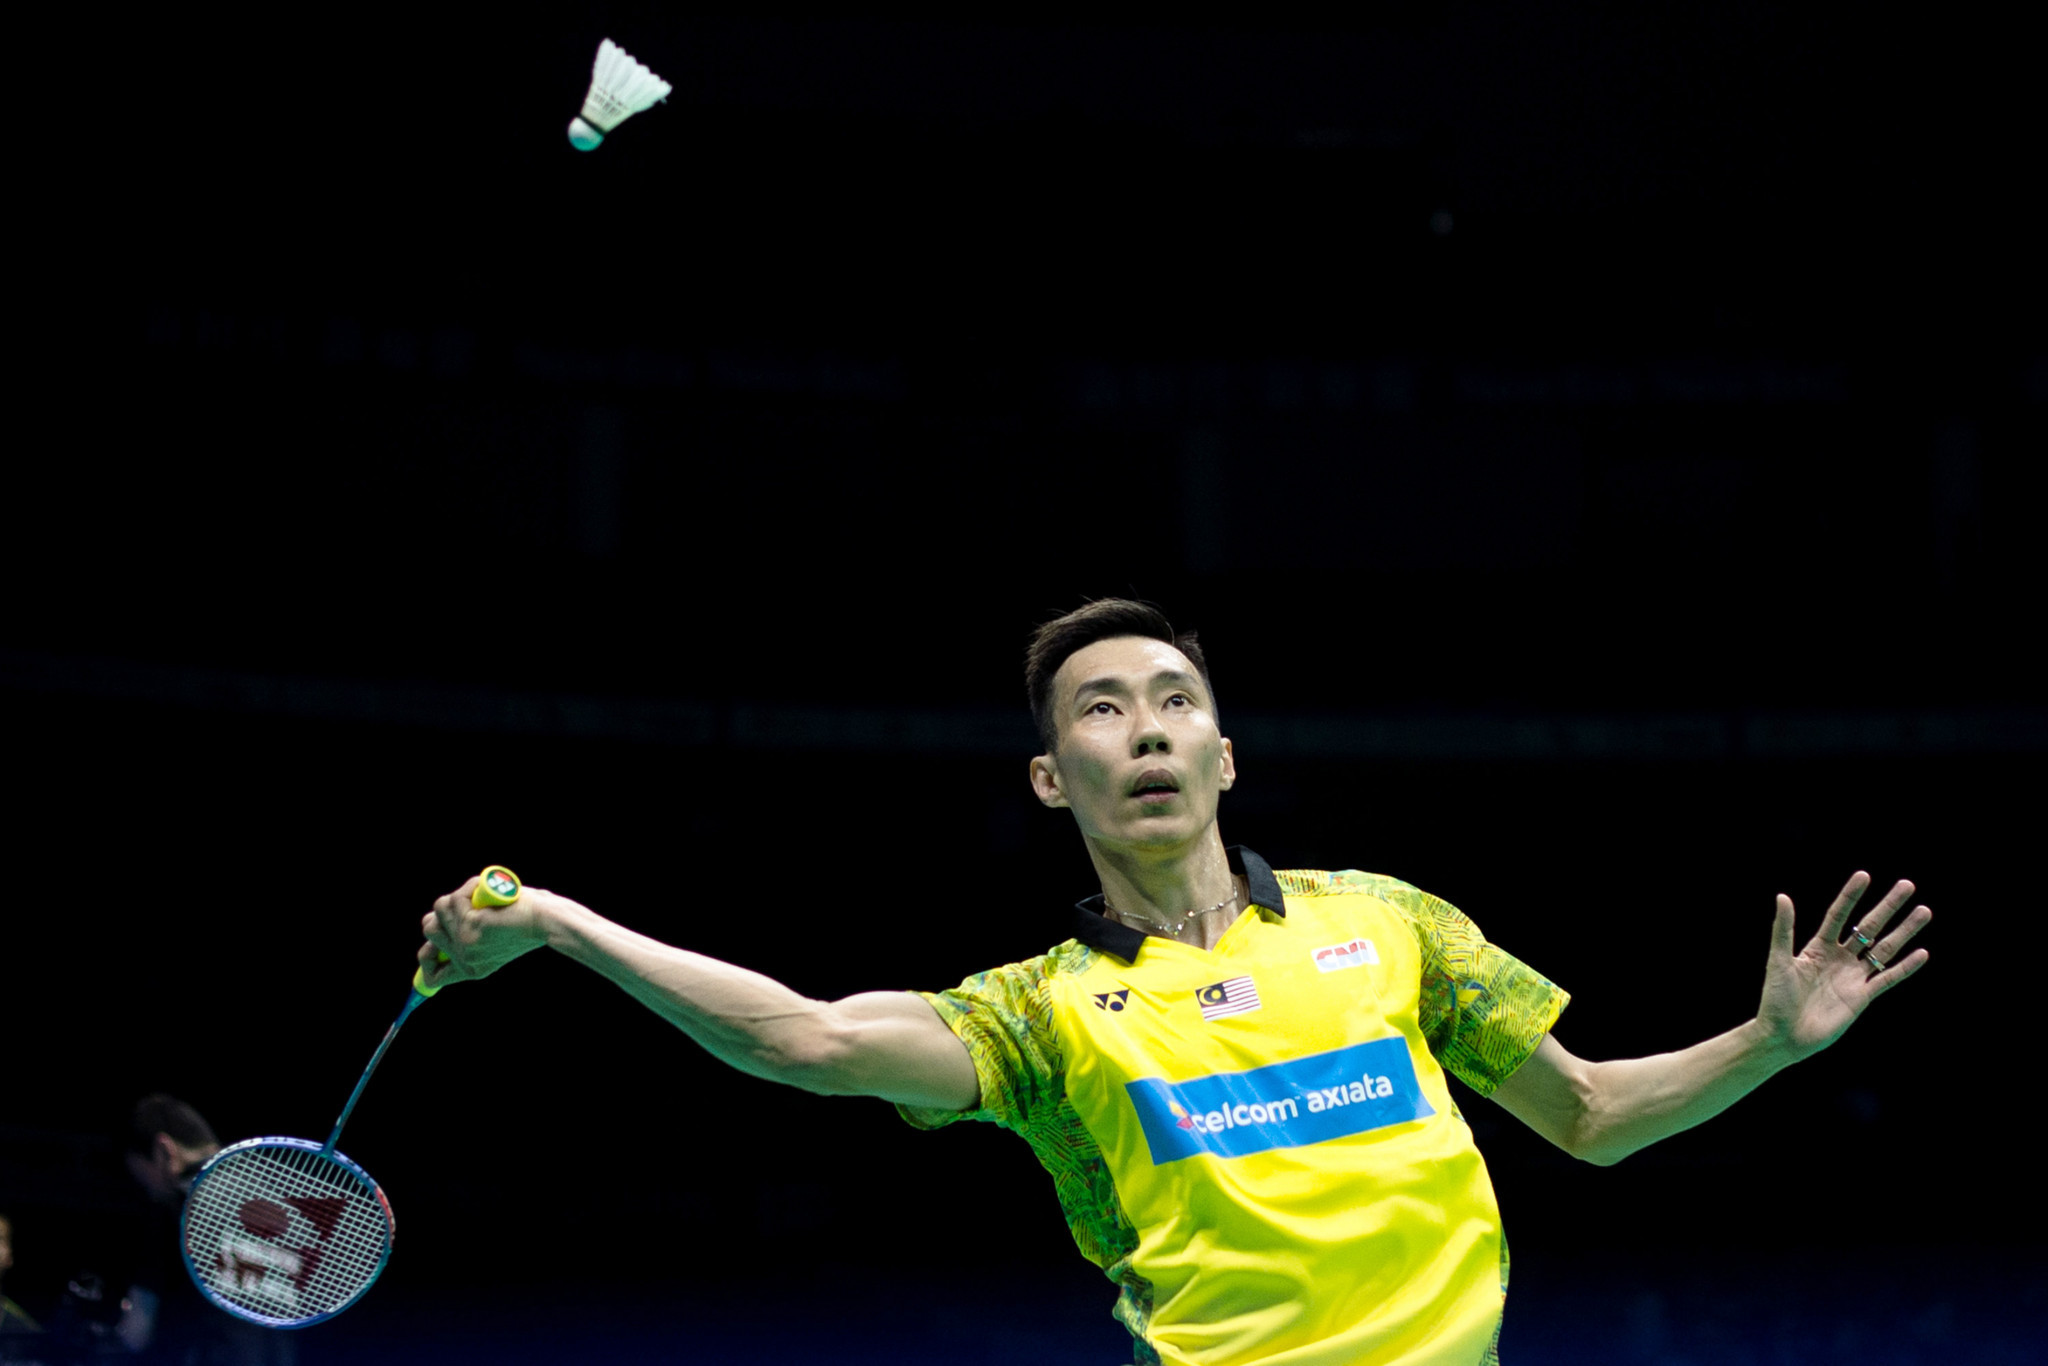 Lee ousts top seed Kidambi to reach semi-finals of Badminton Asia Championships